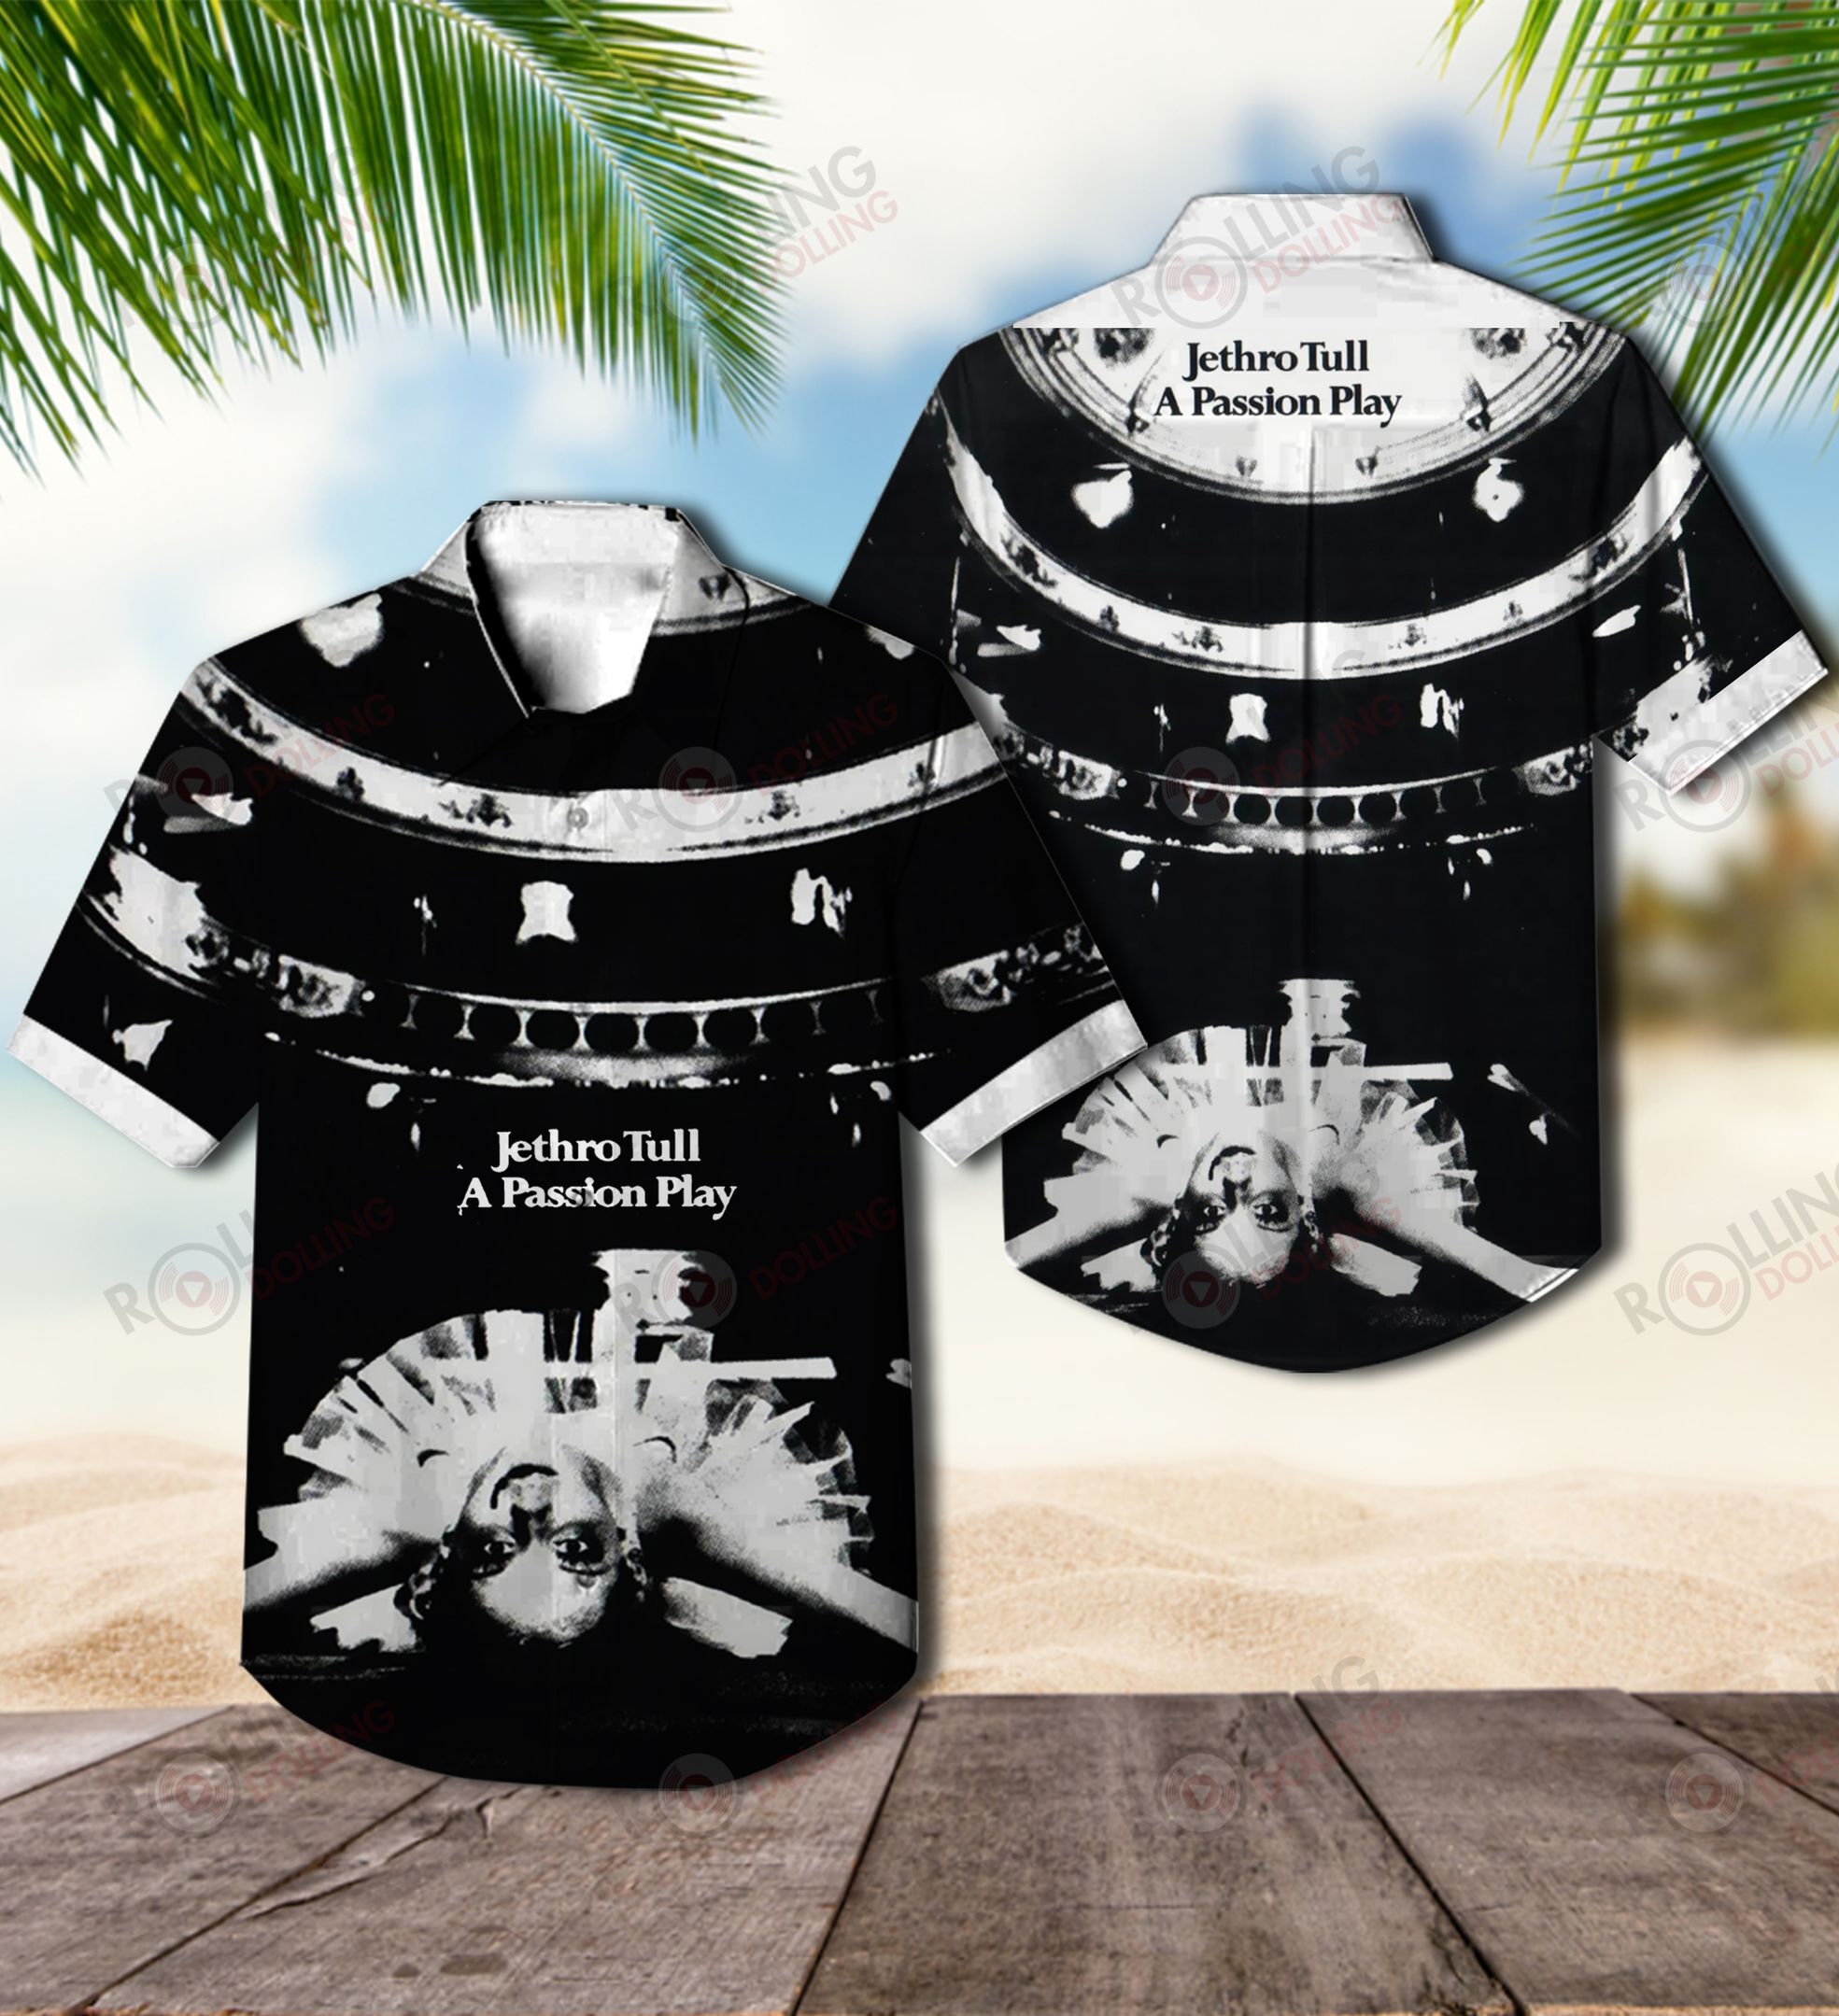 For summer, consider wearing This Amazing Hawaiian Shirt shirt in our store 210